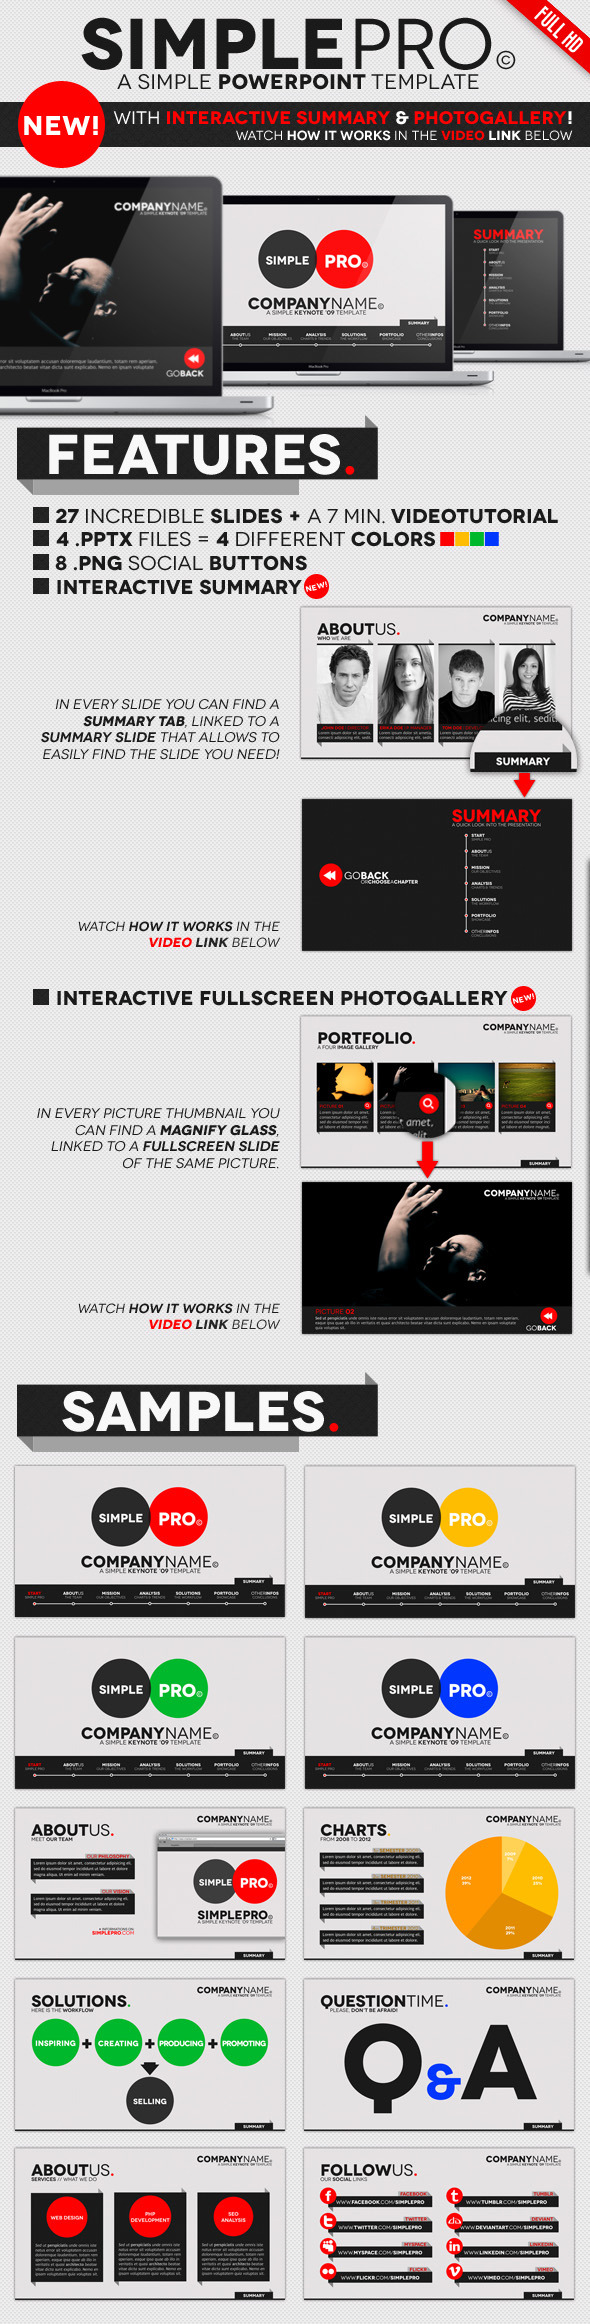 Simple Pro - PowerPoint Interactive Template